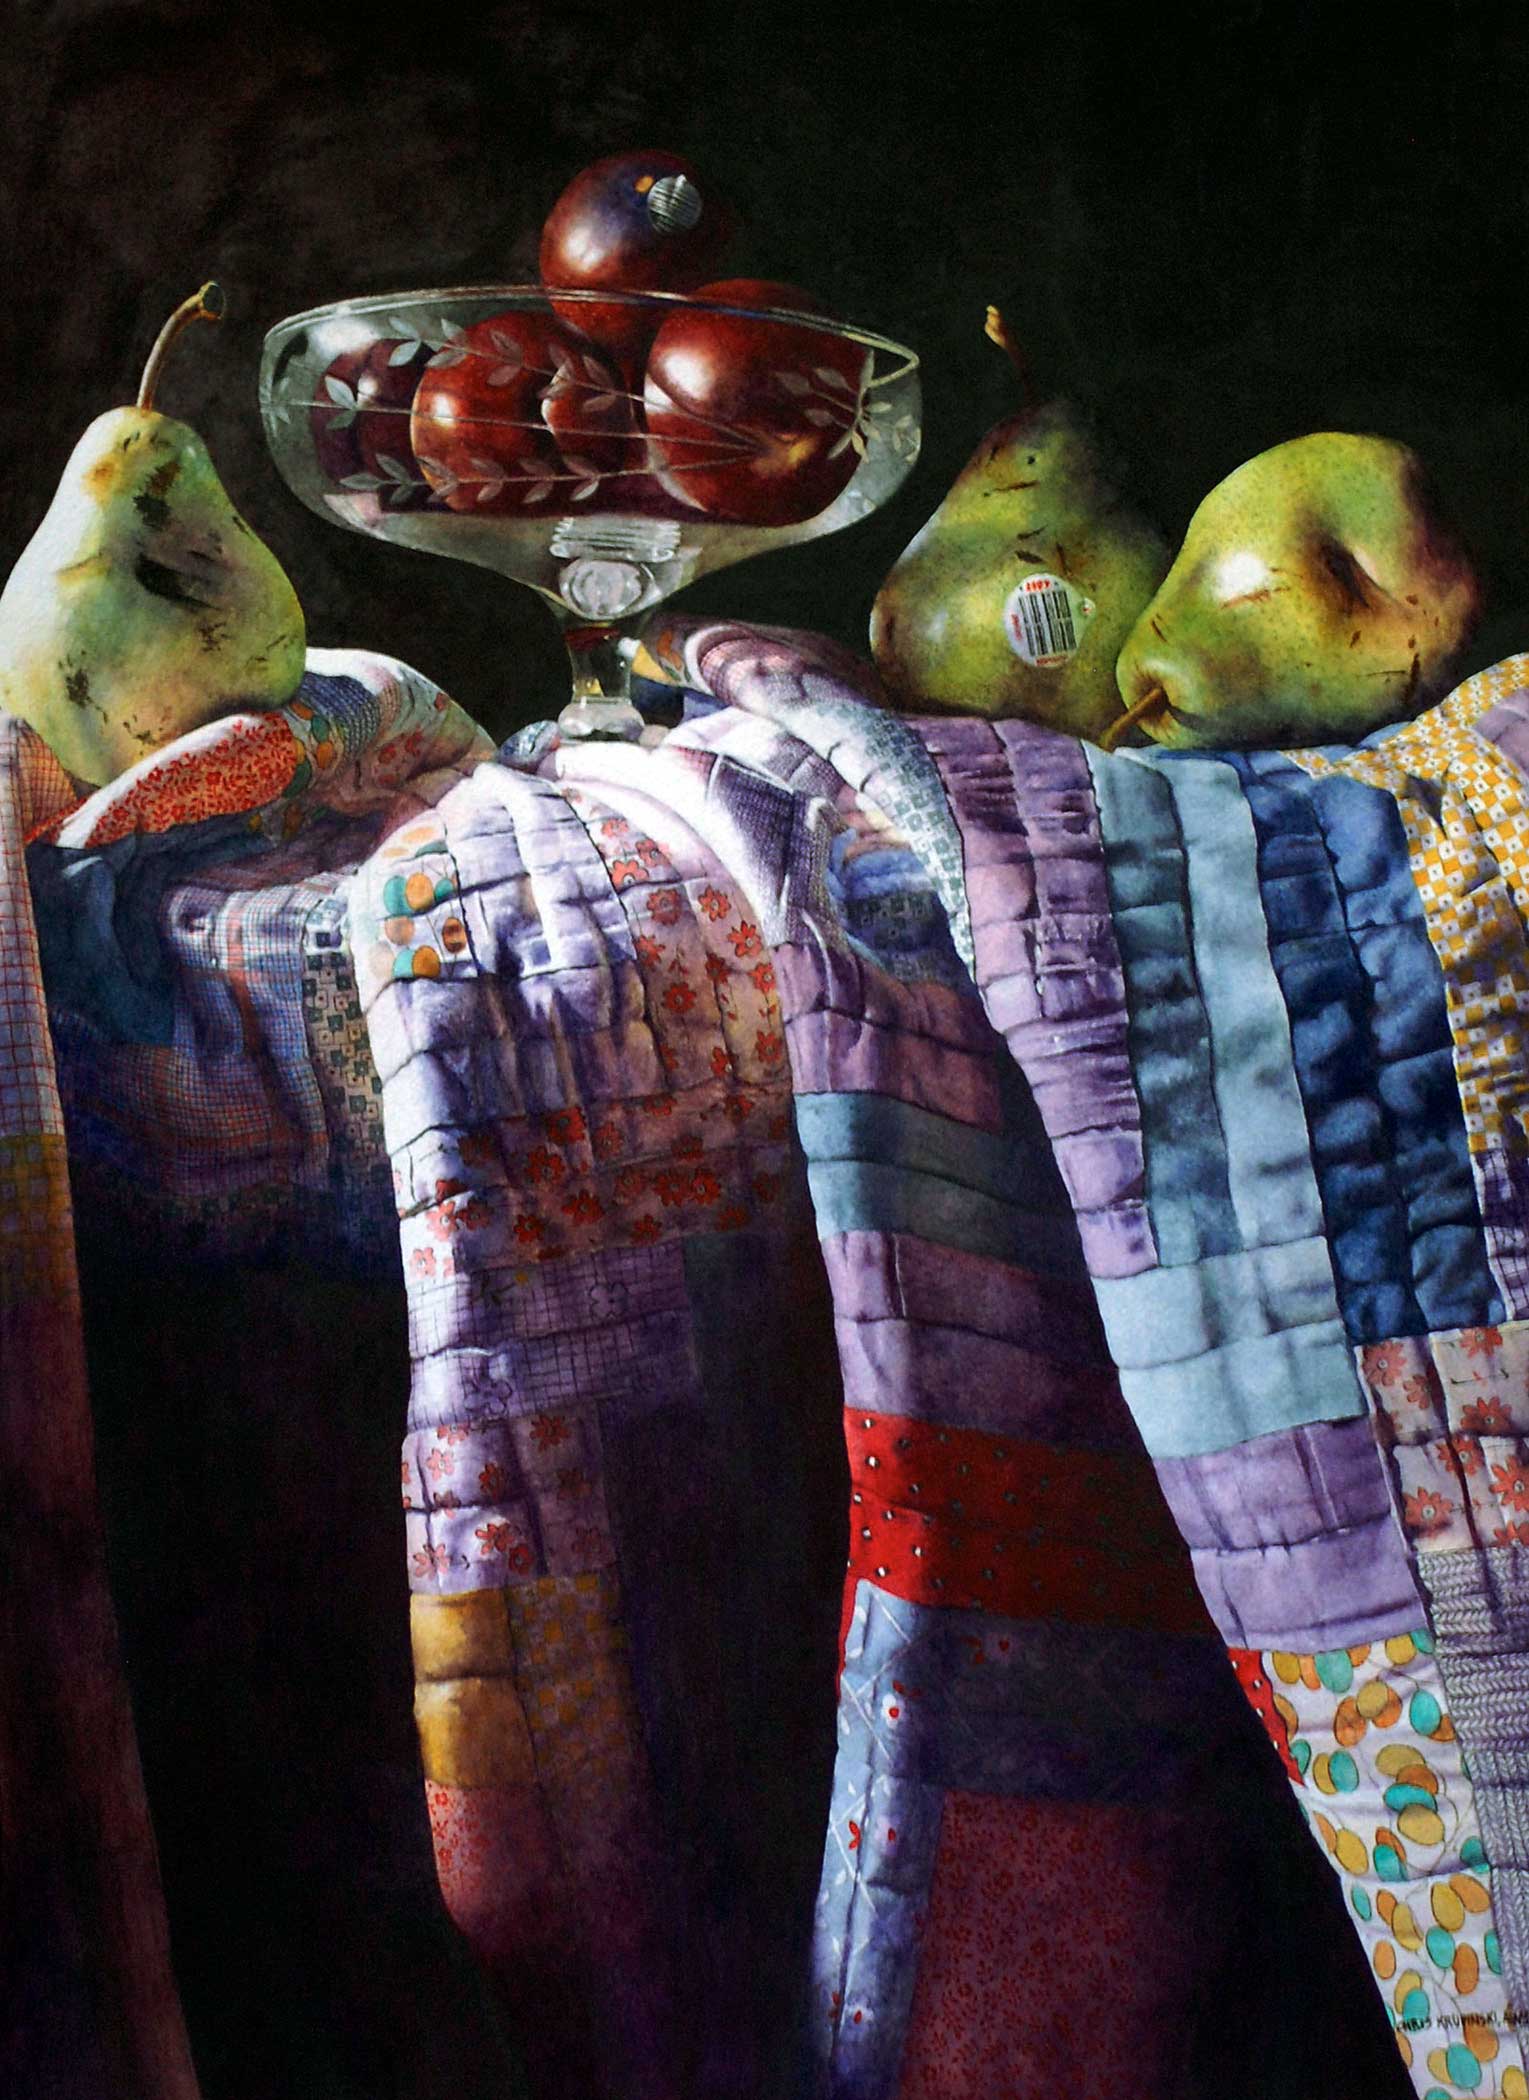 Quilt with Pears and a Bowl of Plums